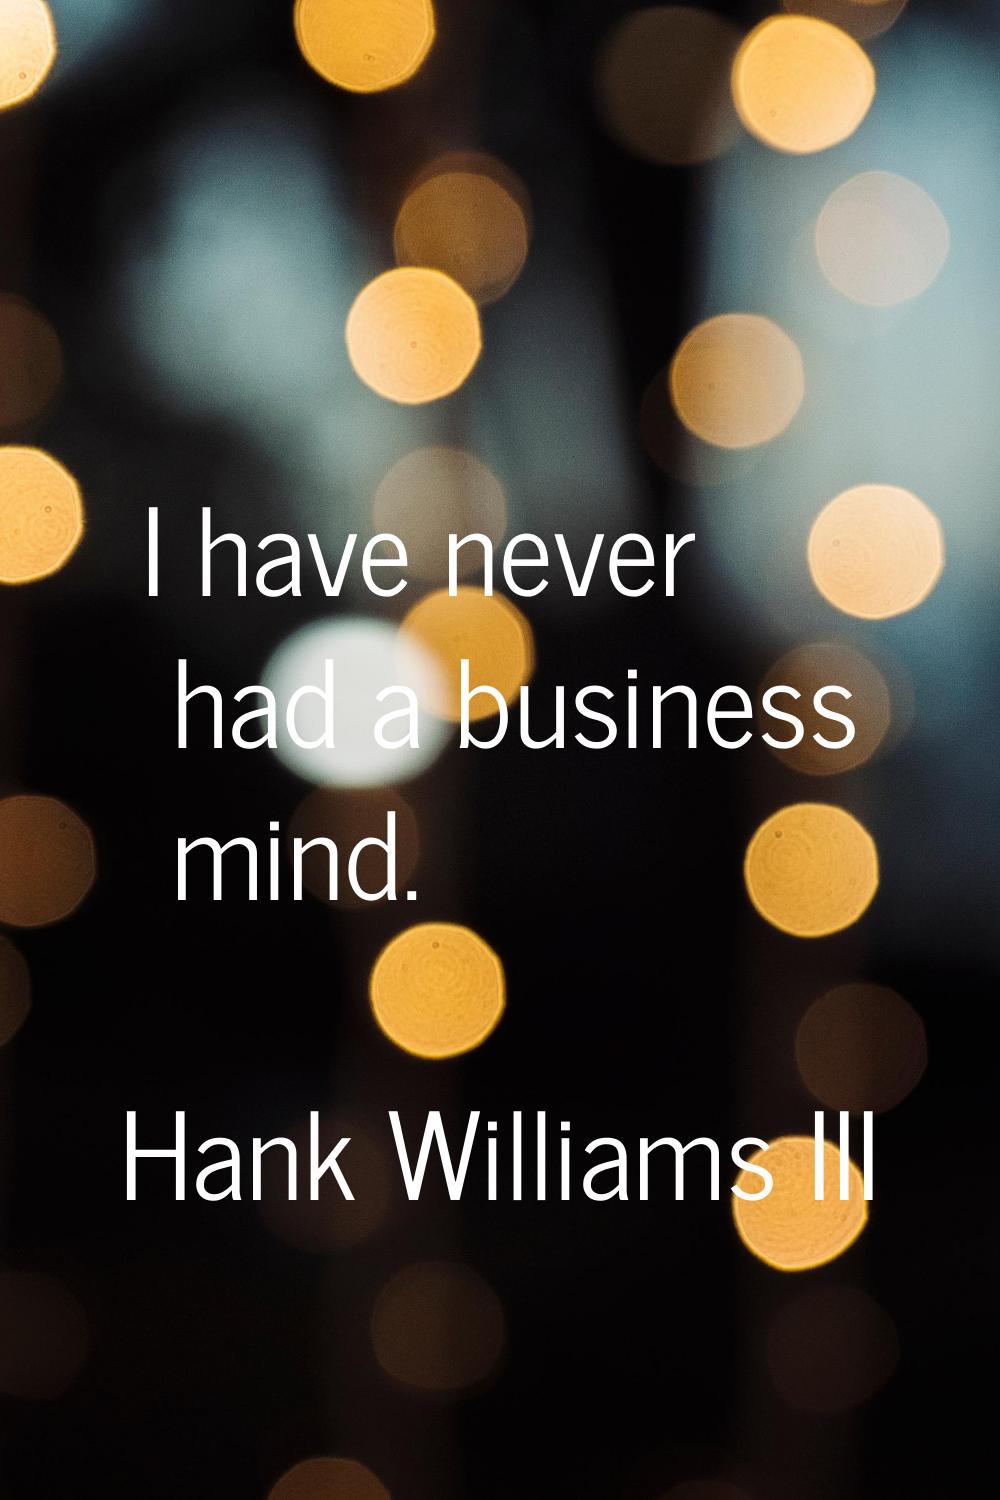 I have never had a business mind.